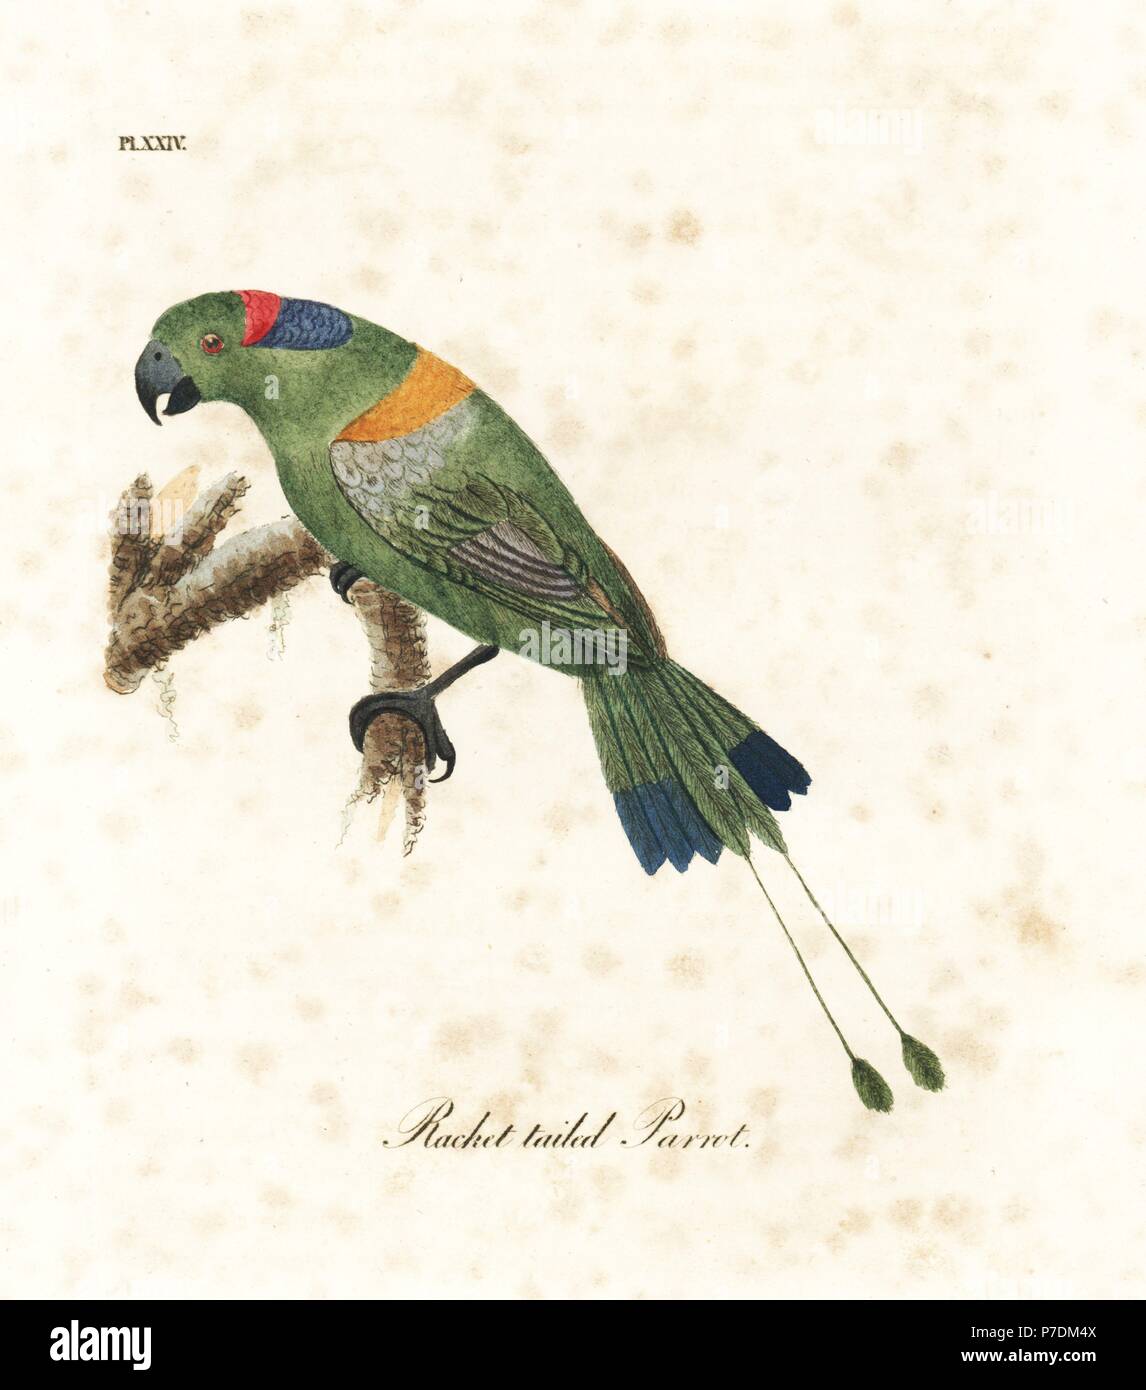 Golden-mantled racket-tail, Prioniturus platurus (Racket-tailed parrot). Handcoloured copperplate drawn and engraved by John Latham from his own A General History of Birds, Winchester, 1822. Stock Photo